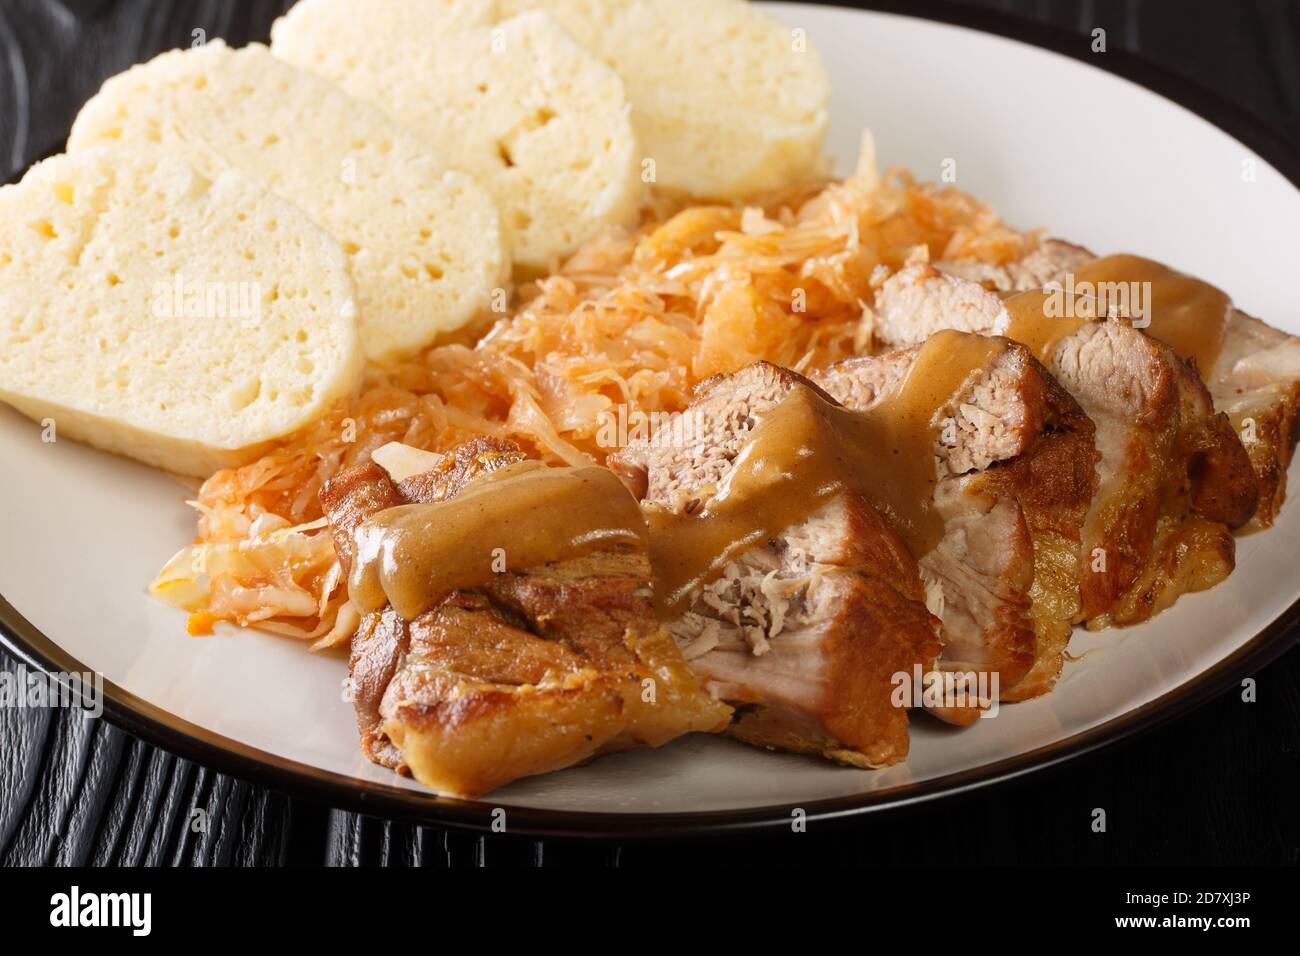 Vepro knedlo zelo this is a Czech dish consisting to pork, dumplings and cabbage close-up in a plate on the table. Horizontal Stock Photo